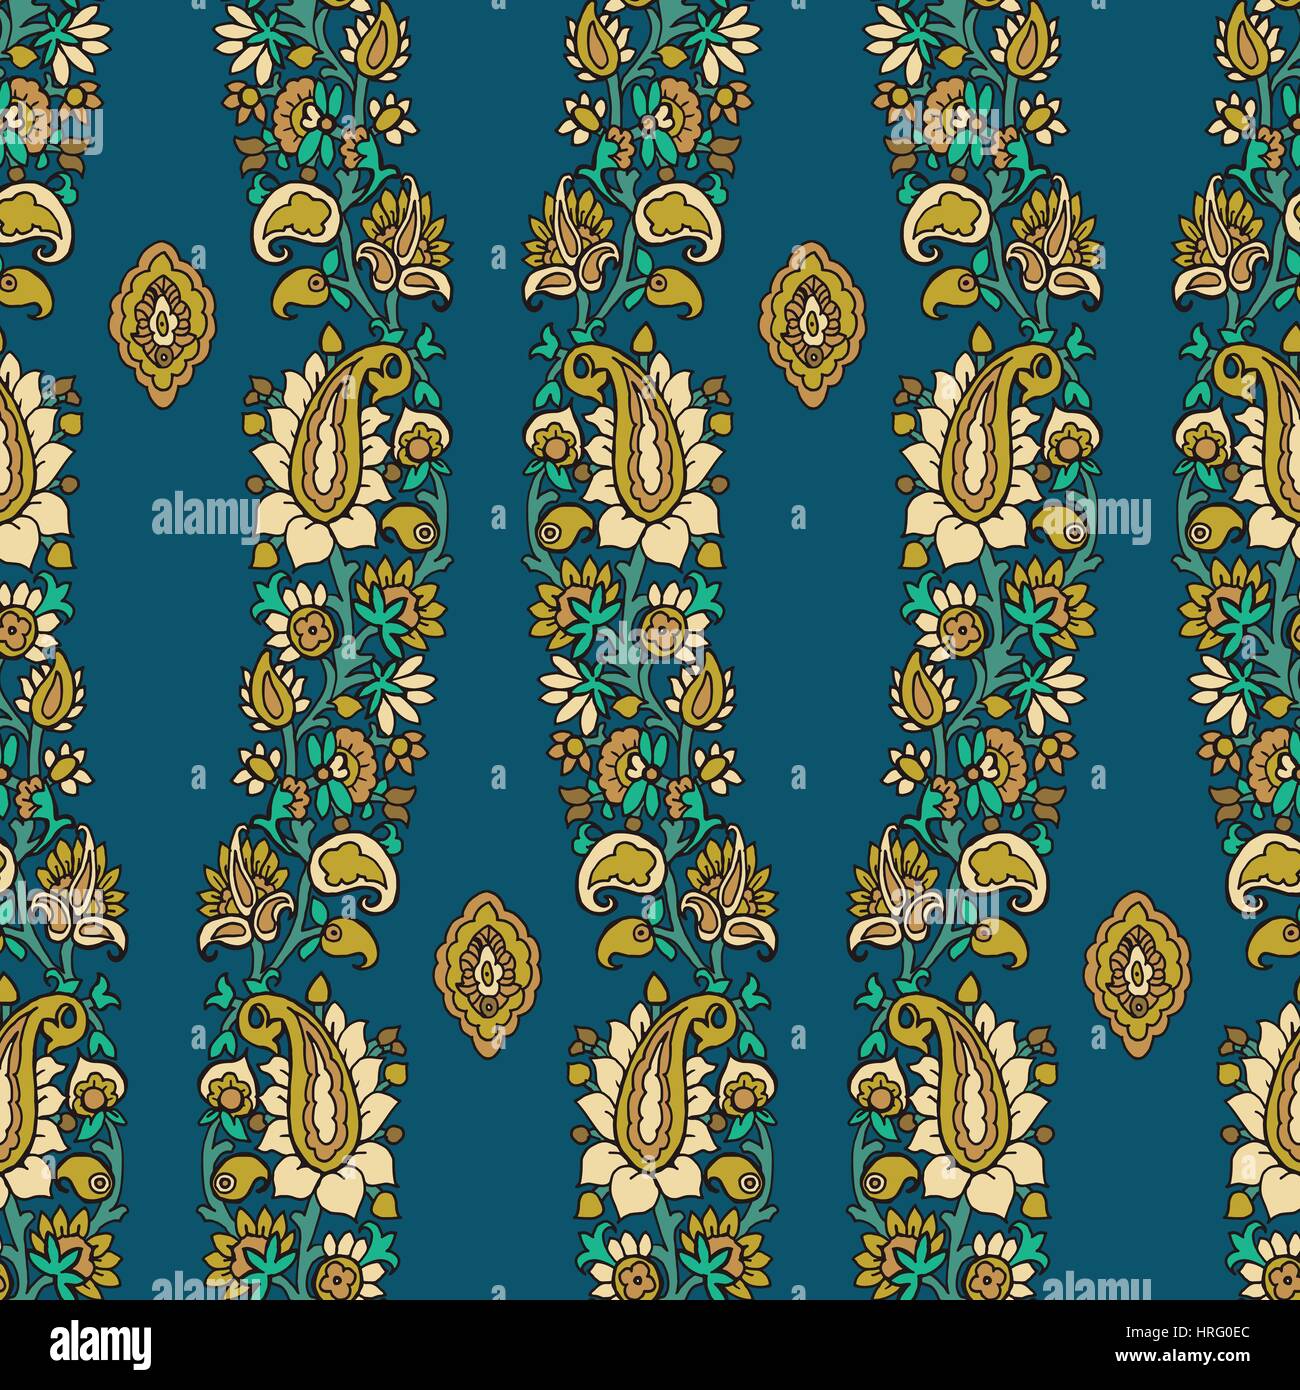 Ethnic floral motif, primitive oriental elements, vertical waves layout. Yellow, green and turquoise tones. Stock Vector